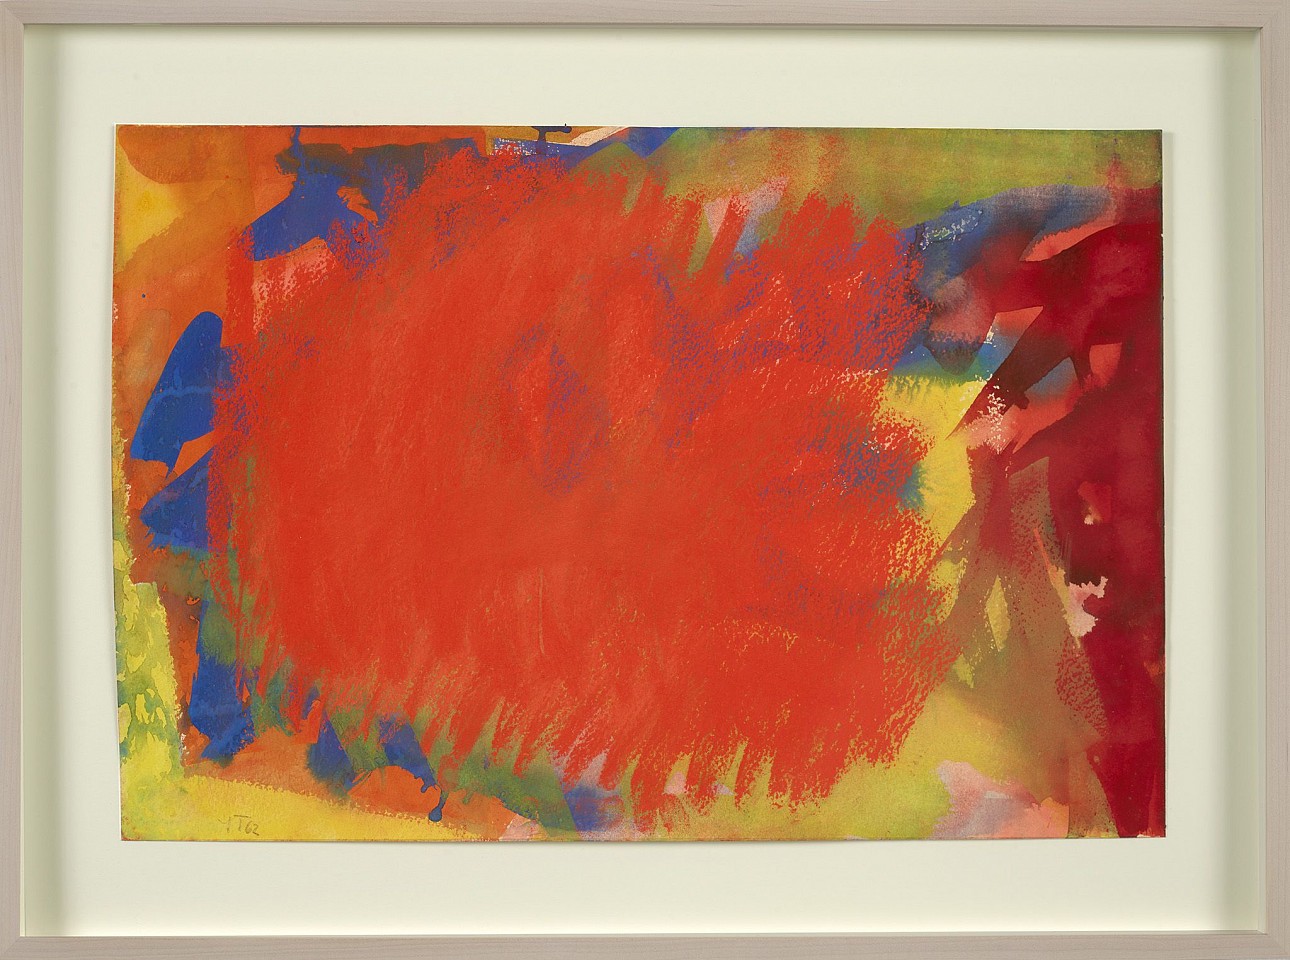 Yvonne Thomas, Untitled | SOLD, 1962
Watercolor and gouache on paper, 15 x 22 in. (38.1 x 55.9 cm)
THO-00077